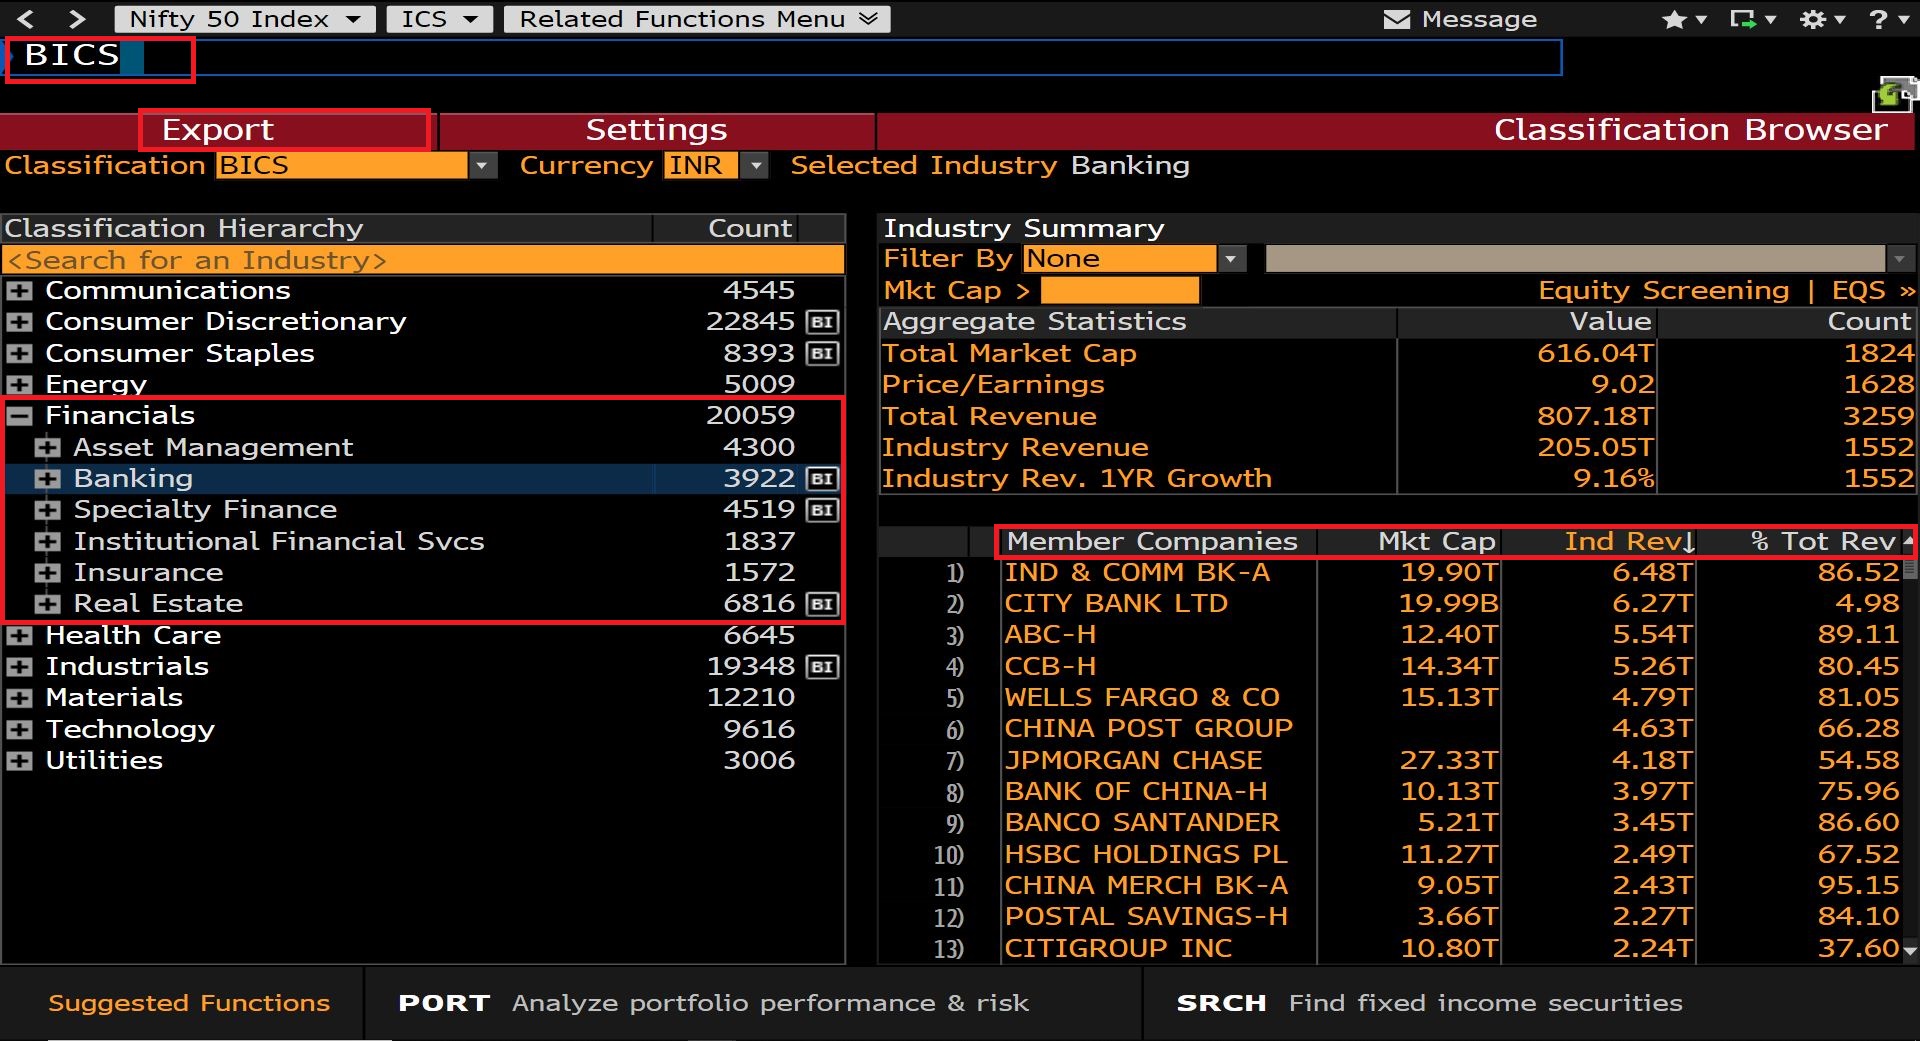 Login to Bloomberg (Available in Library) then Search for BICS and Select Financials and Select Required Industry